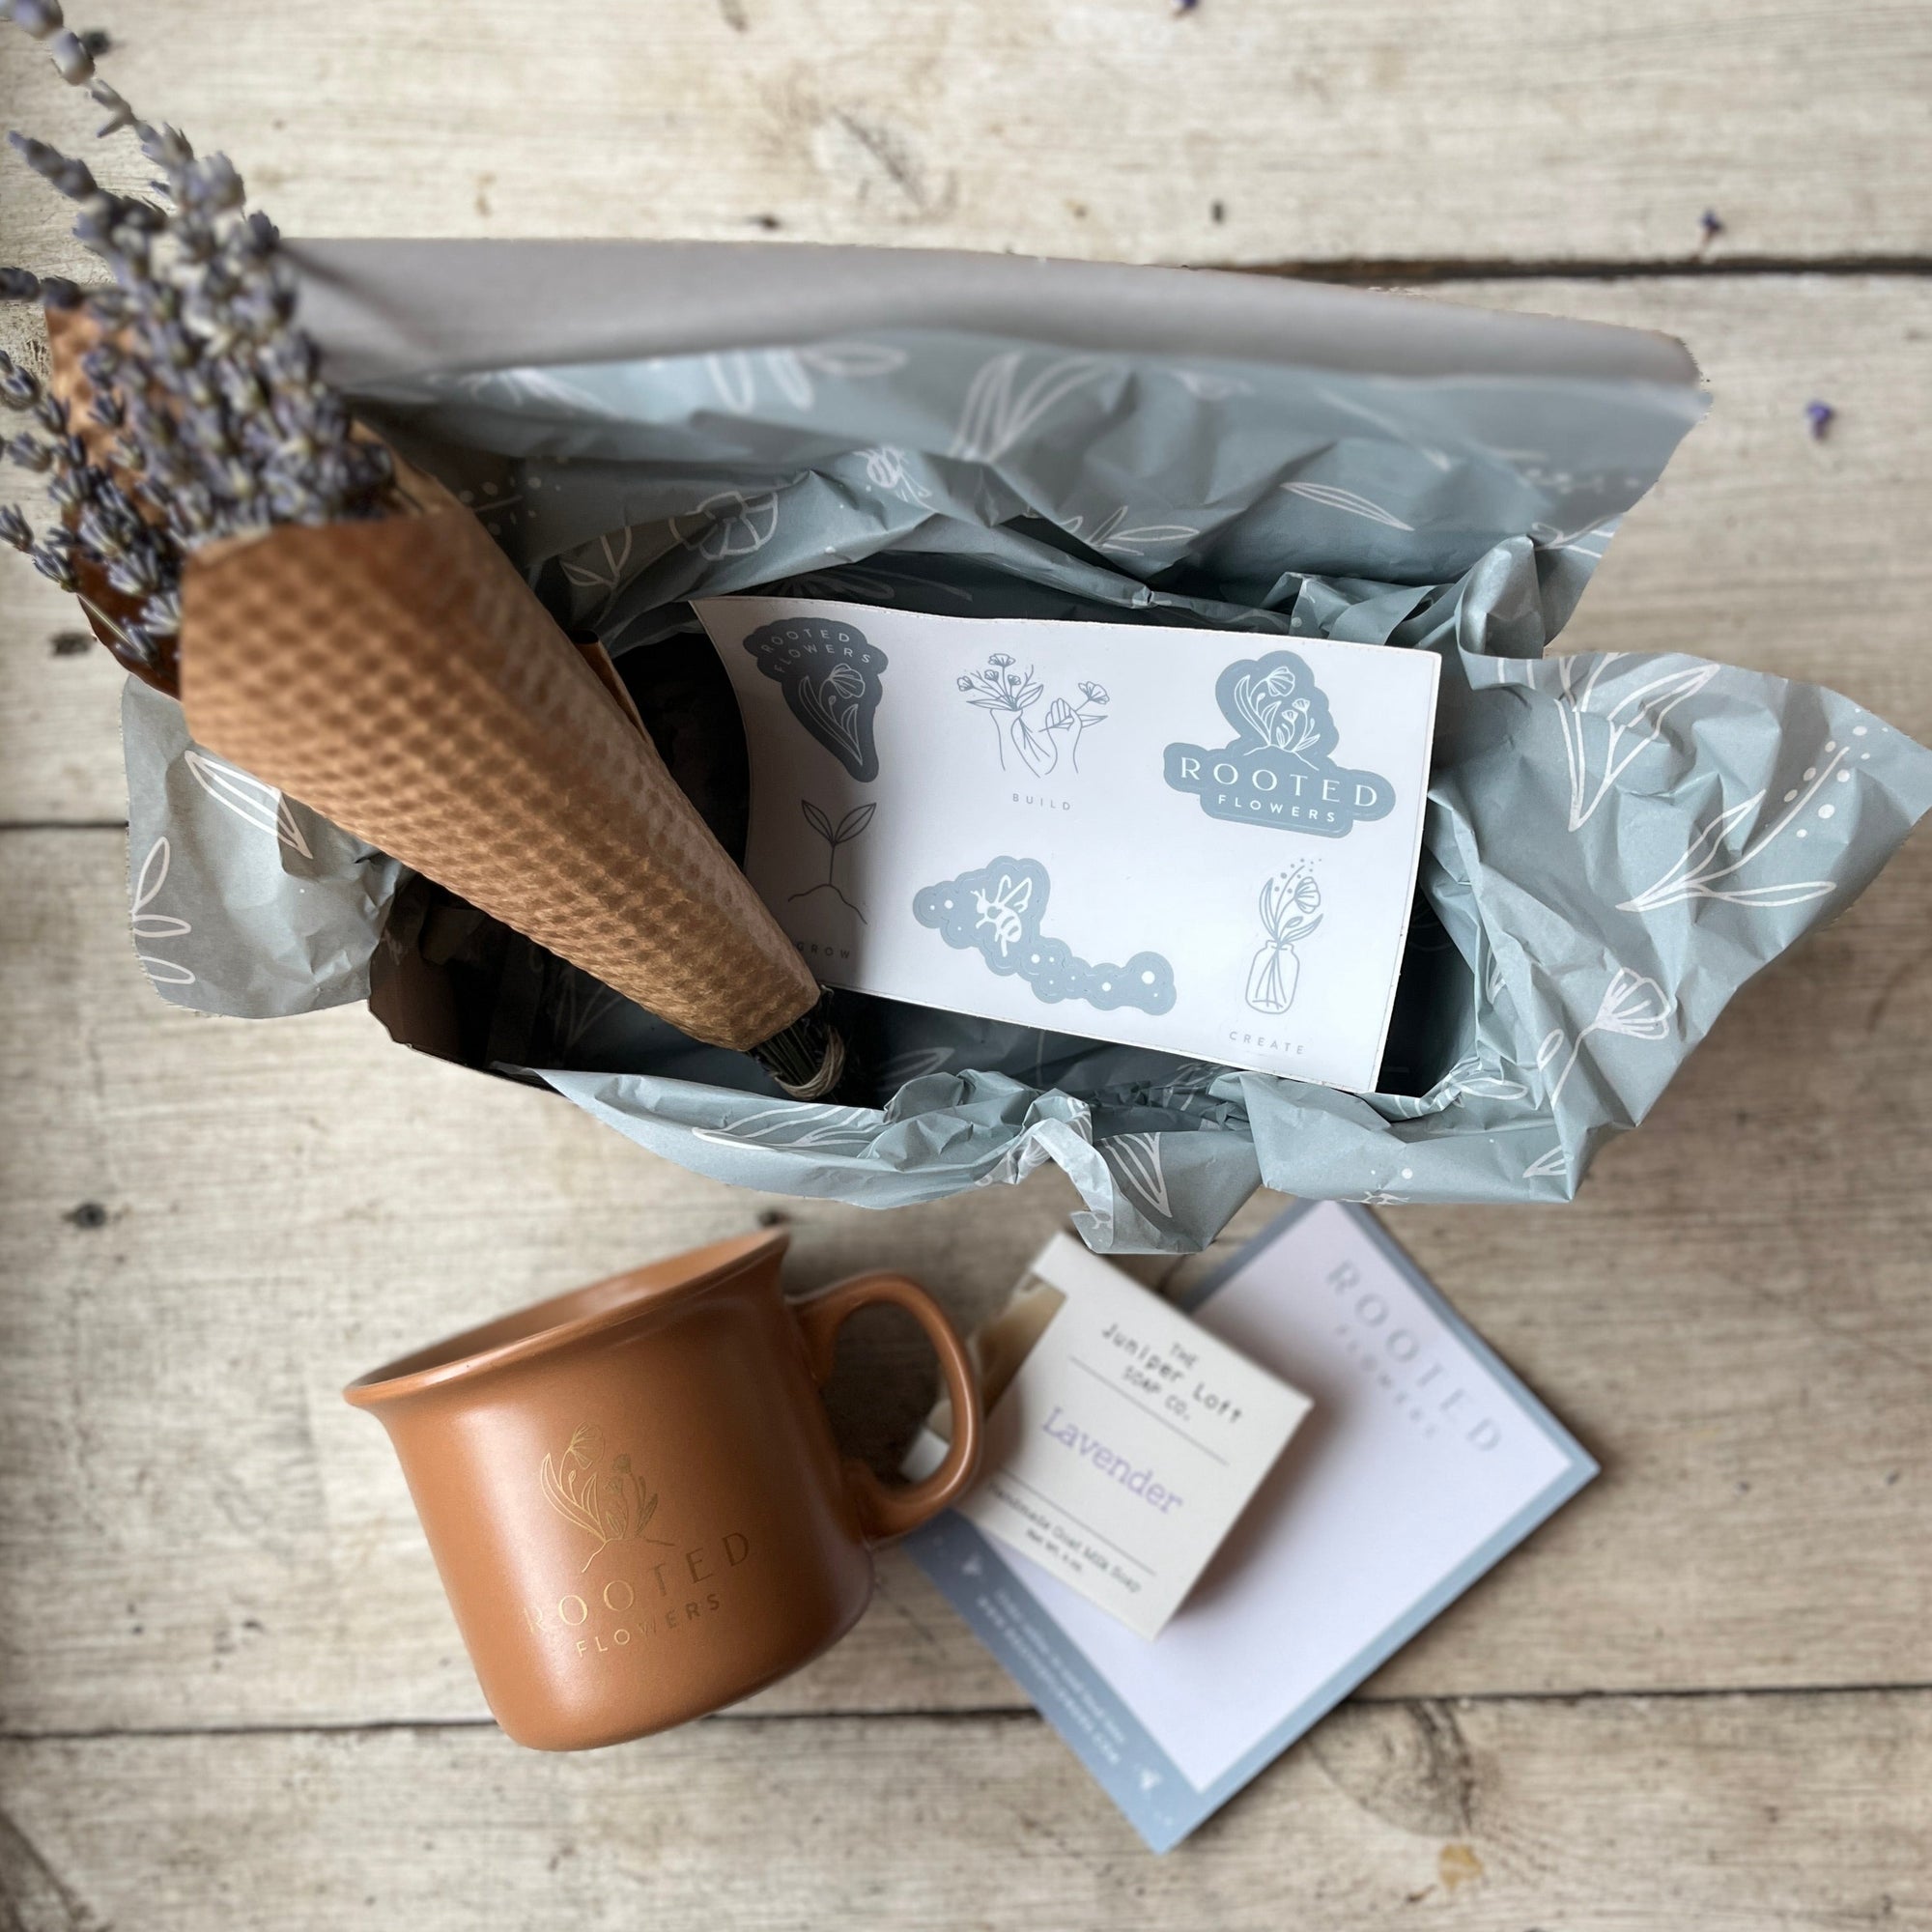 Image of the Lavender Bliss Box by Rooted Flowers, featuring an eco-friendly mug, a bunch of dried lavender, a bar of homemade lavender goat milk soap, and fun brand stickers, arranged neatly against a rustic wooden background. Perfect for back-to-school gifting.